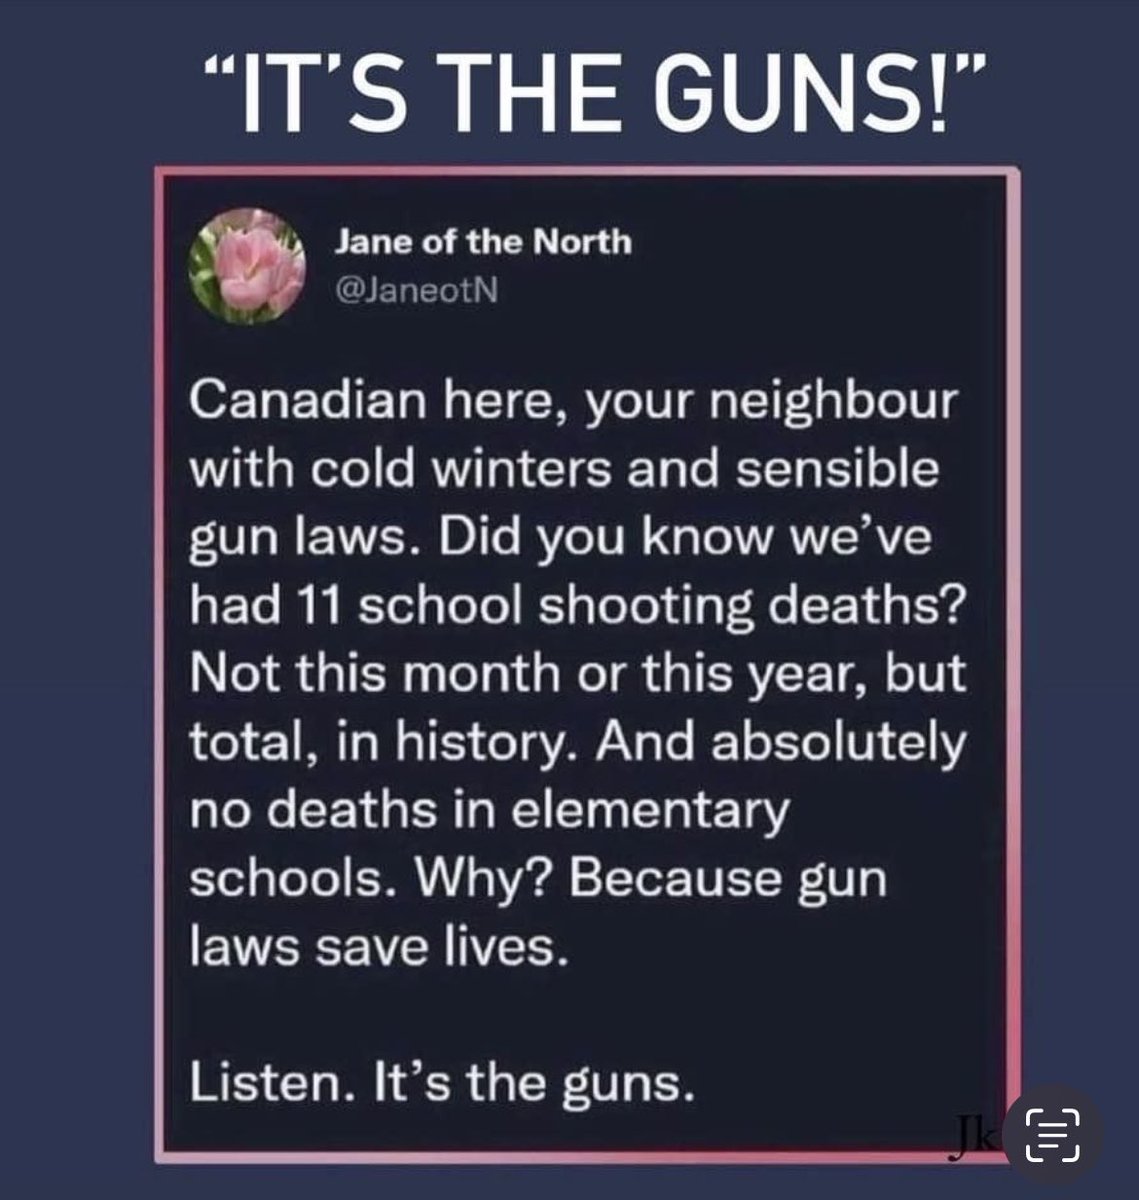 Do you know how many school shootings our neighbor, Canada, has had? Is this not SIGNIFICANT? They KNOW gun laws save lives! #DemVoice1 #ProudBlue #FreshResists #OurBlueVoice